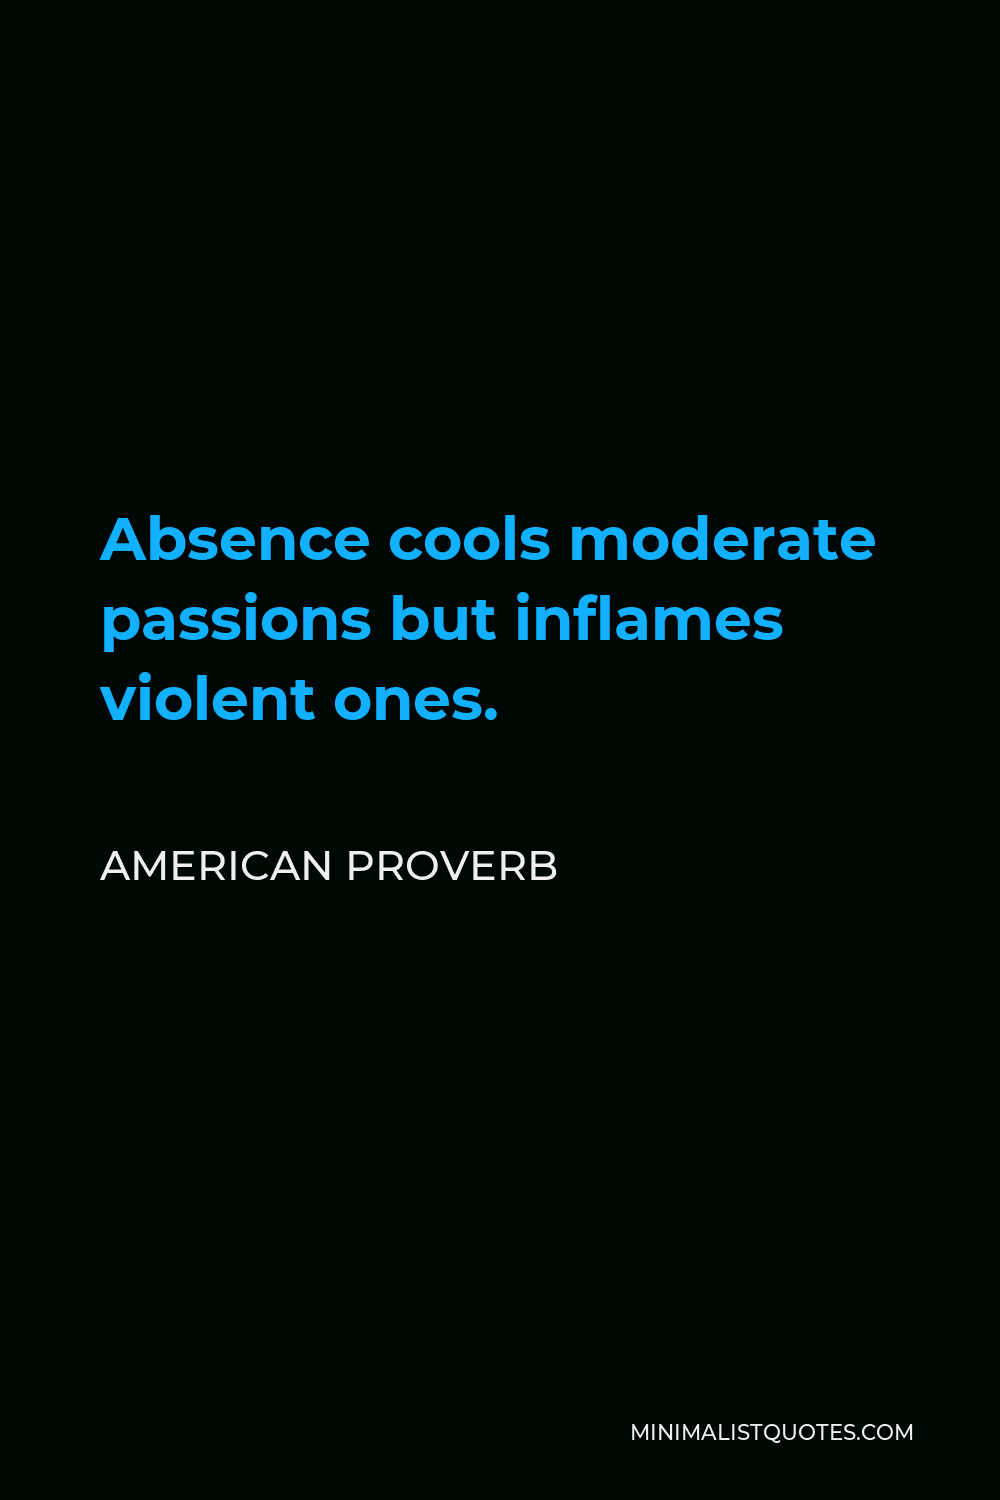 American Proverb Quote - Absence cools moderate passions but inflames violent ones.